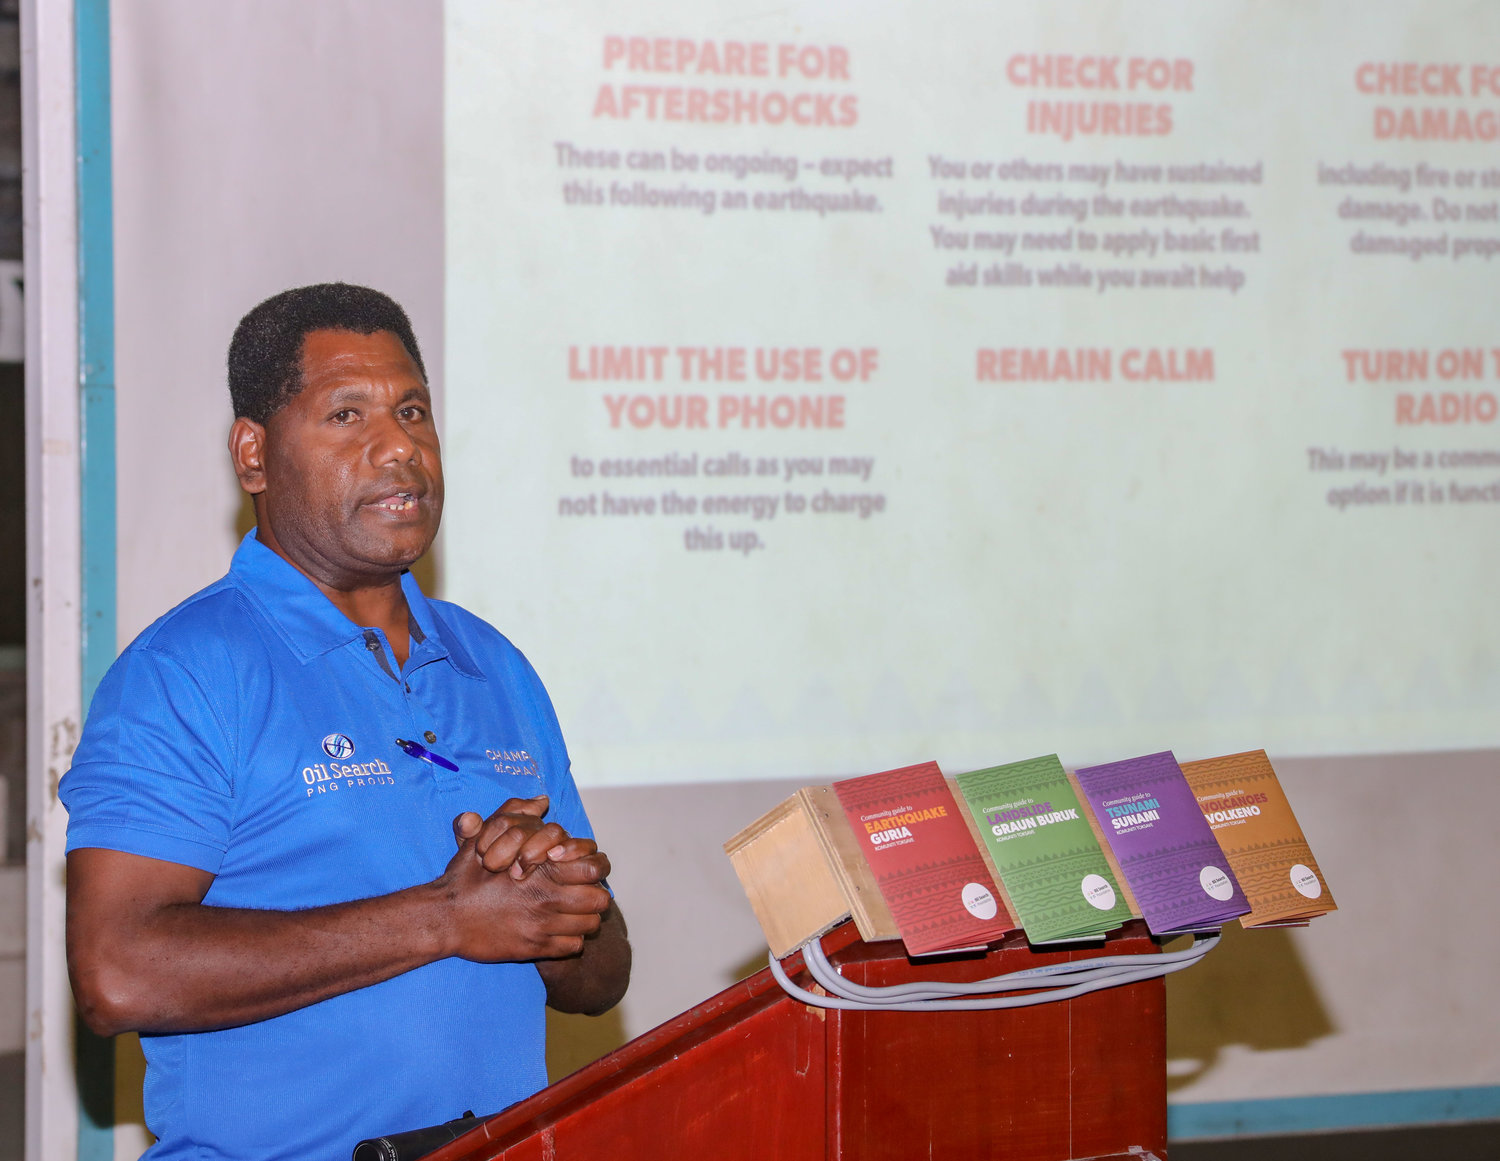 OSL Safety Officer Joseph Rangan speaks at the launch of the Disaster Series Toolkits.